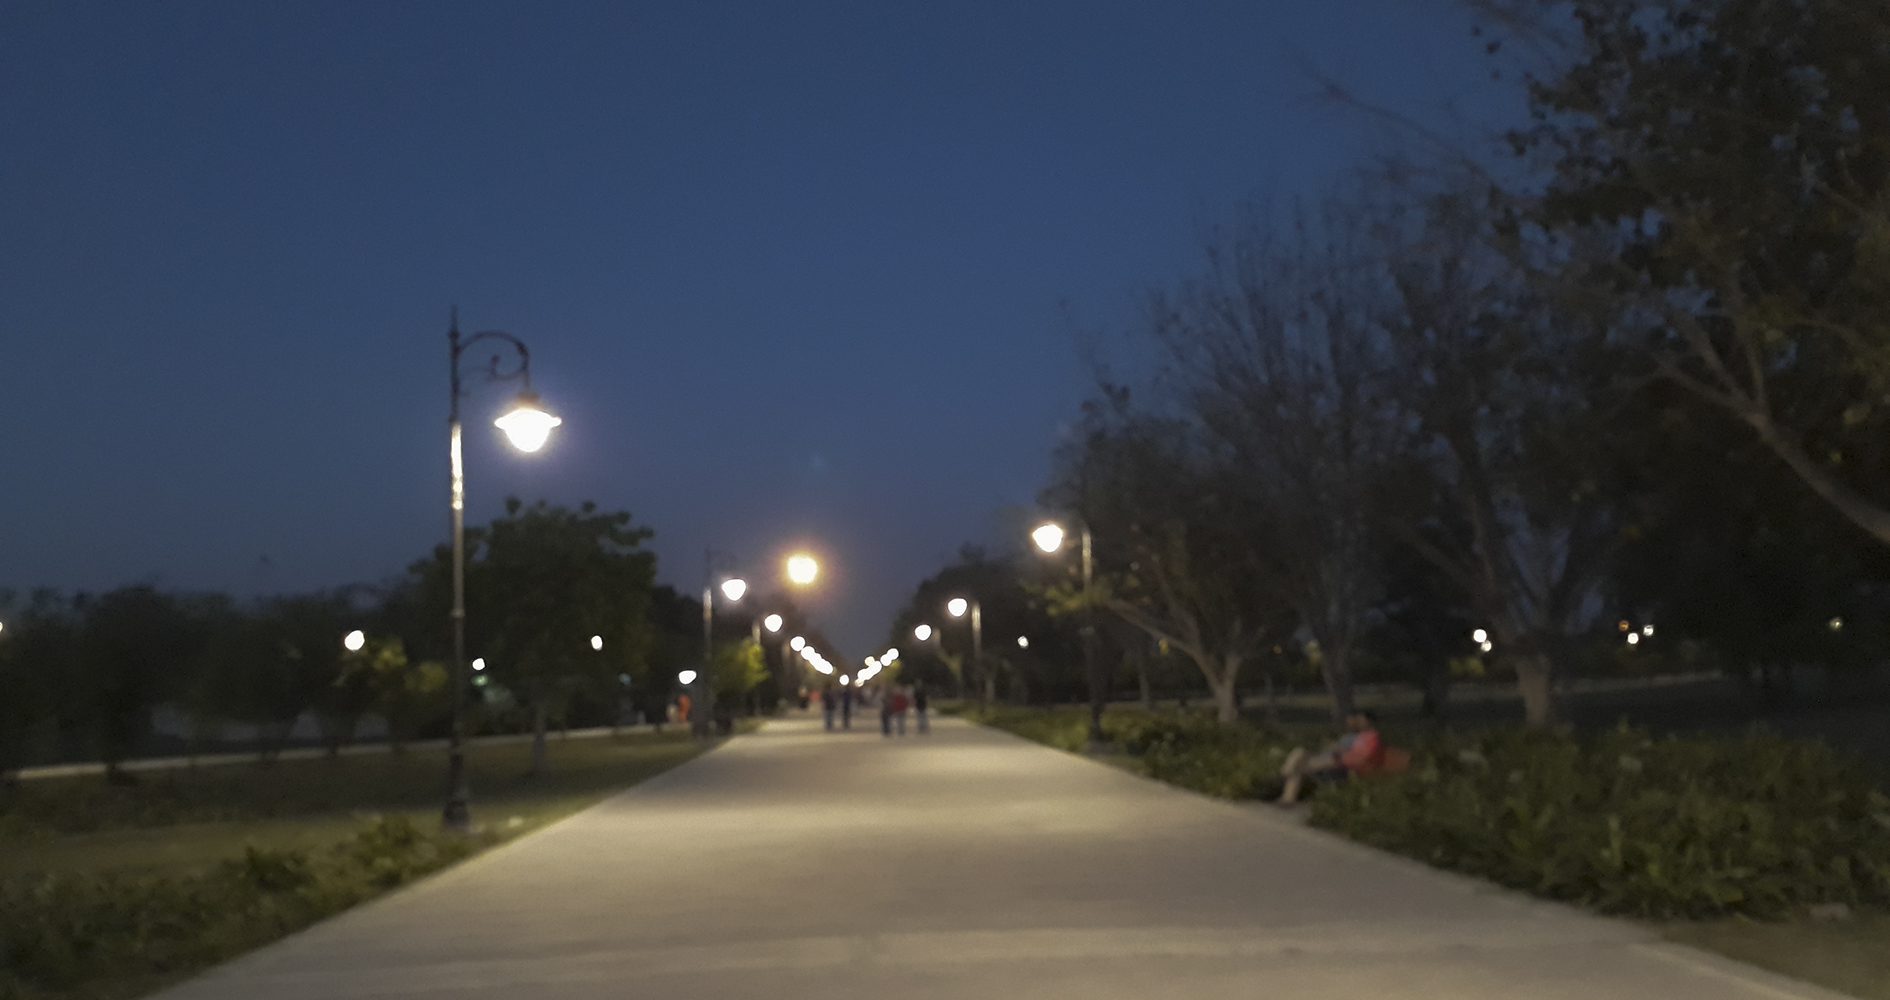 Pic of Janeshwar Mishra park lucknow. Shot in the Evening. Shows well lit tracks.